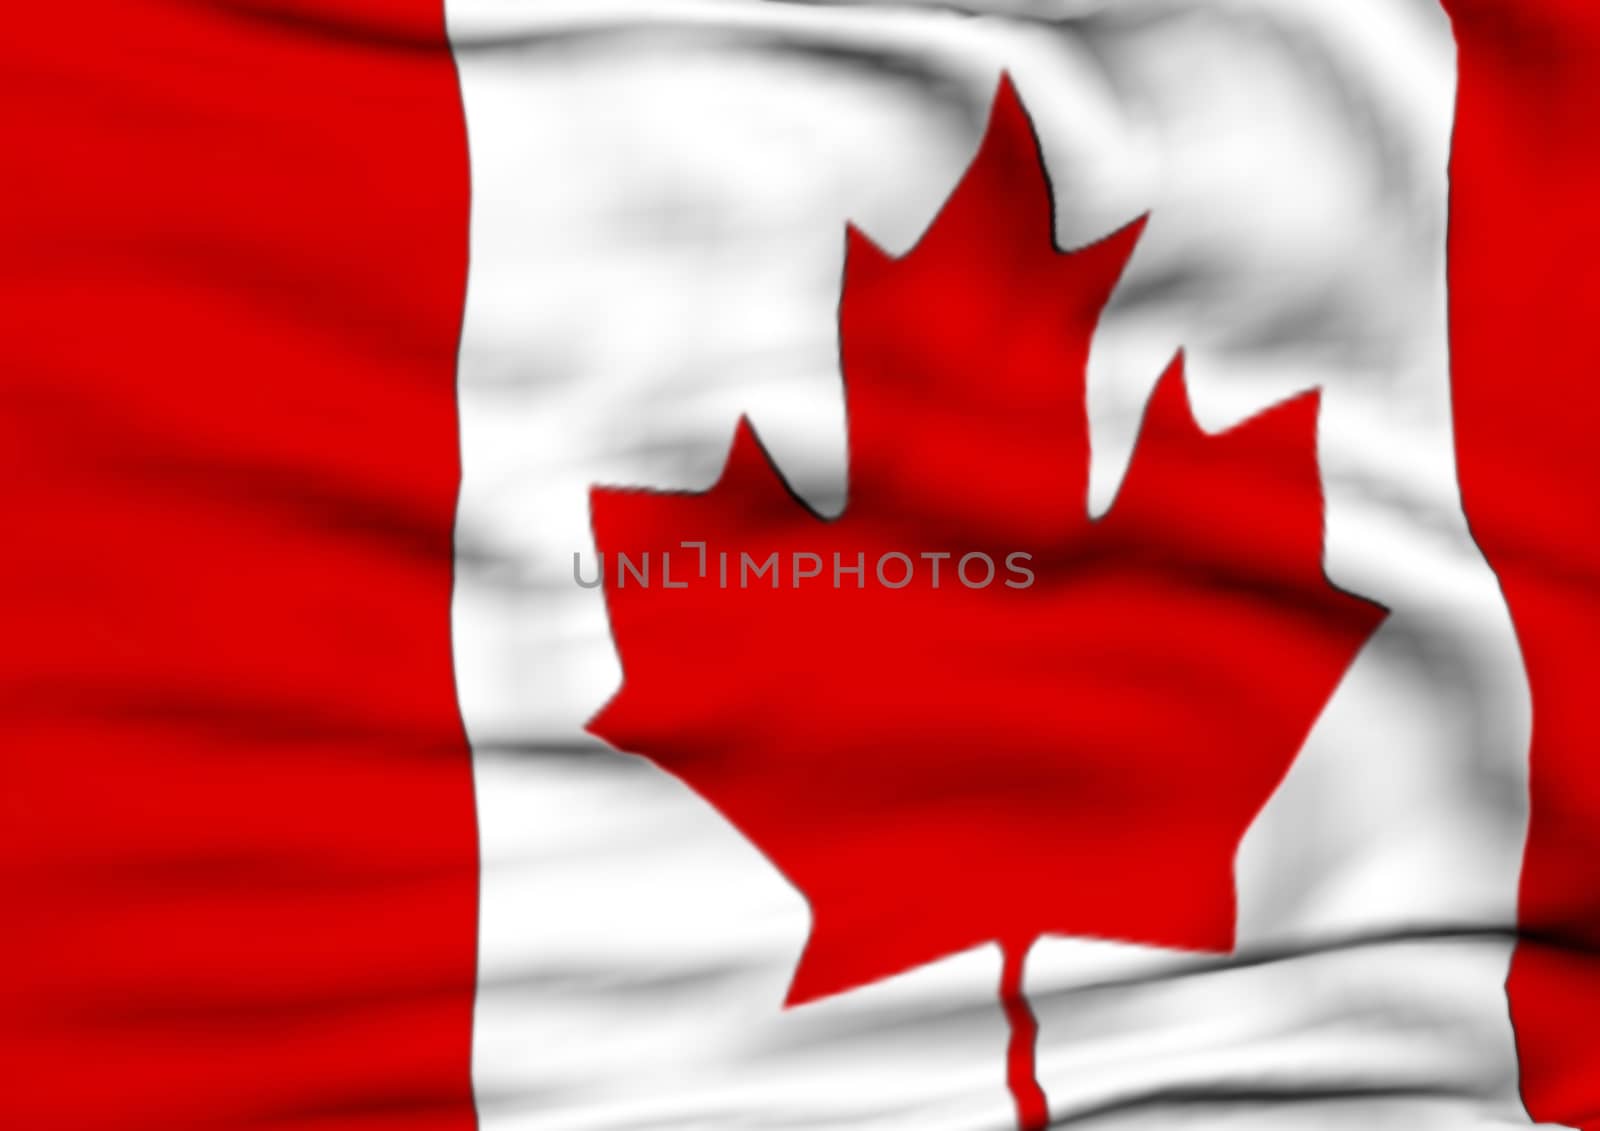 Image of a flag of Canada by richter1910